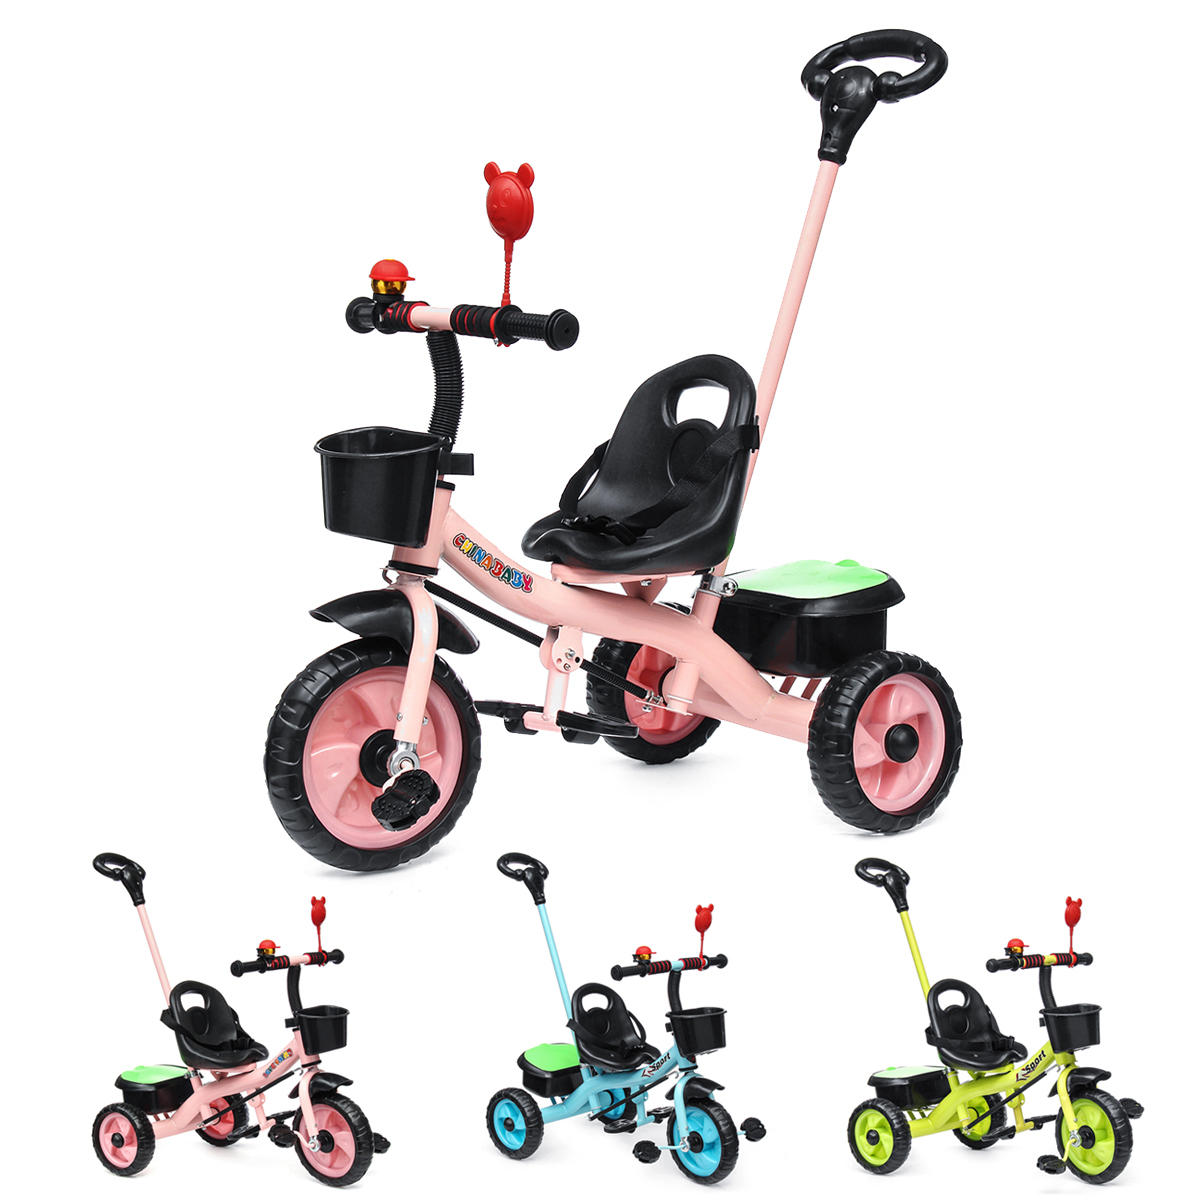 3 wheel bicycle for baby